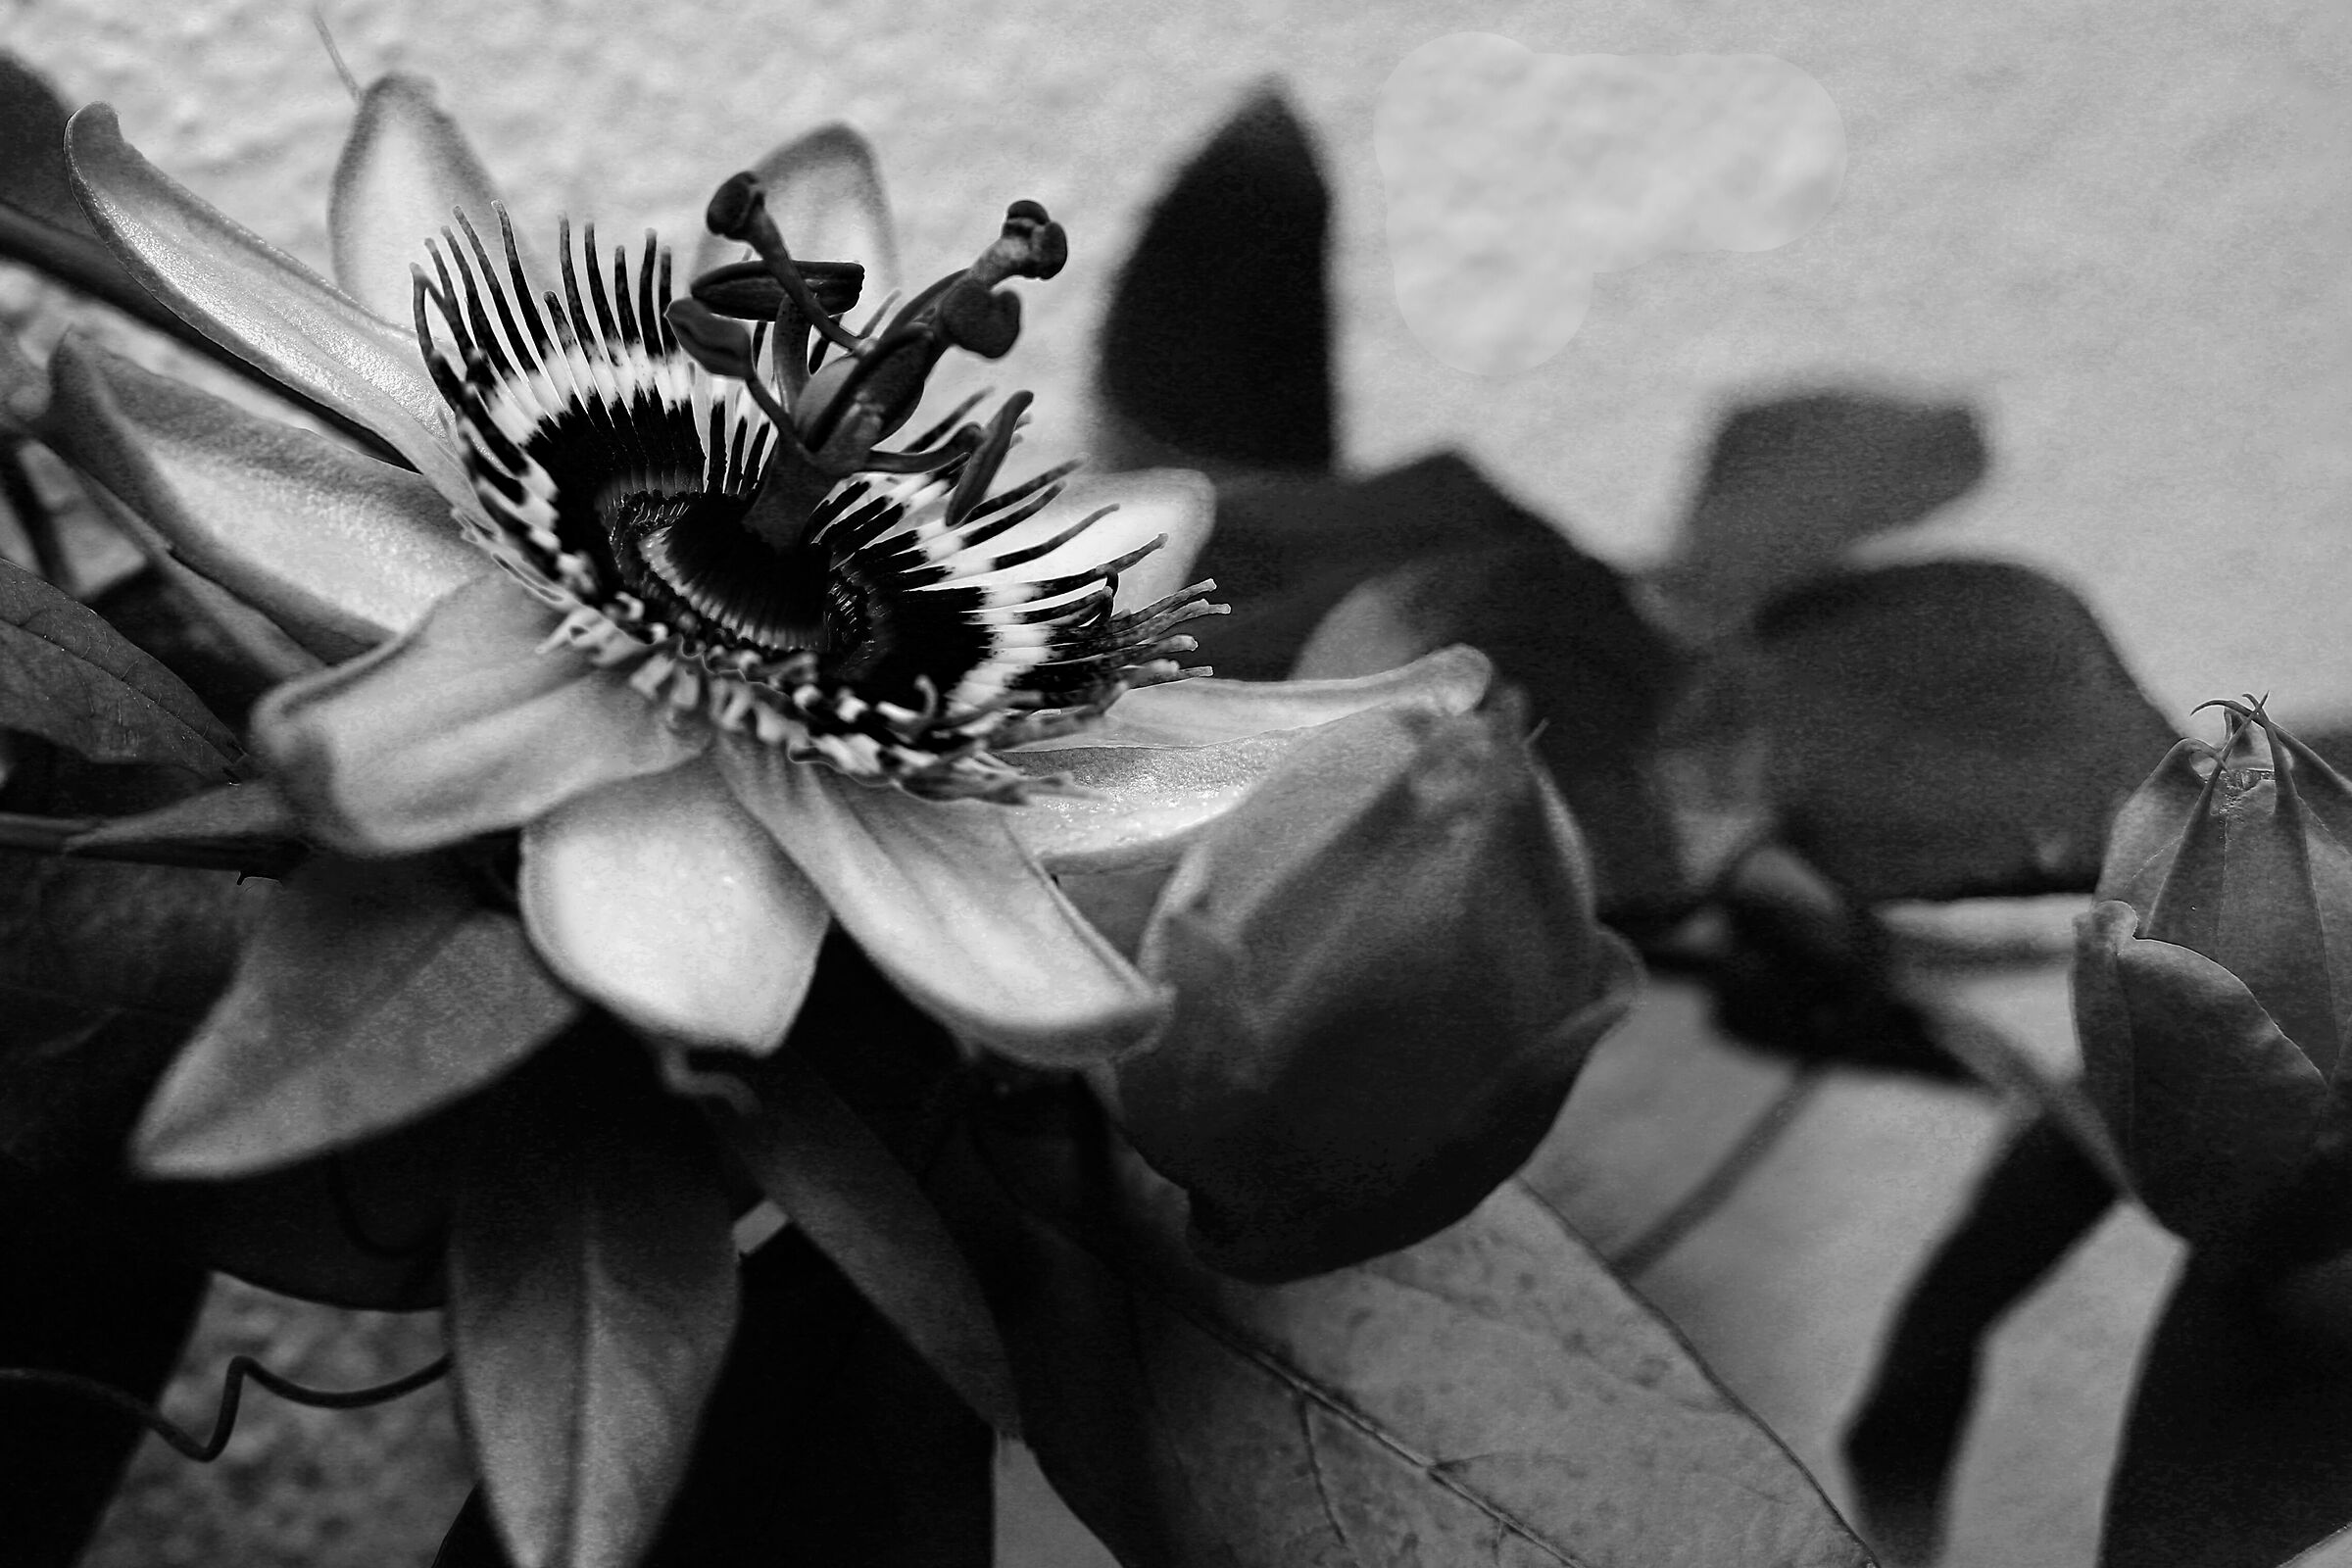 Passiflora2 - Better in color or b/n?...